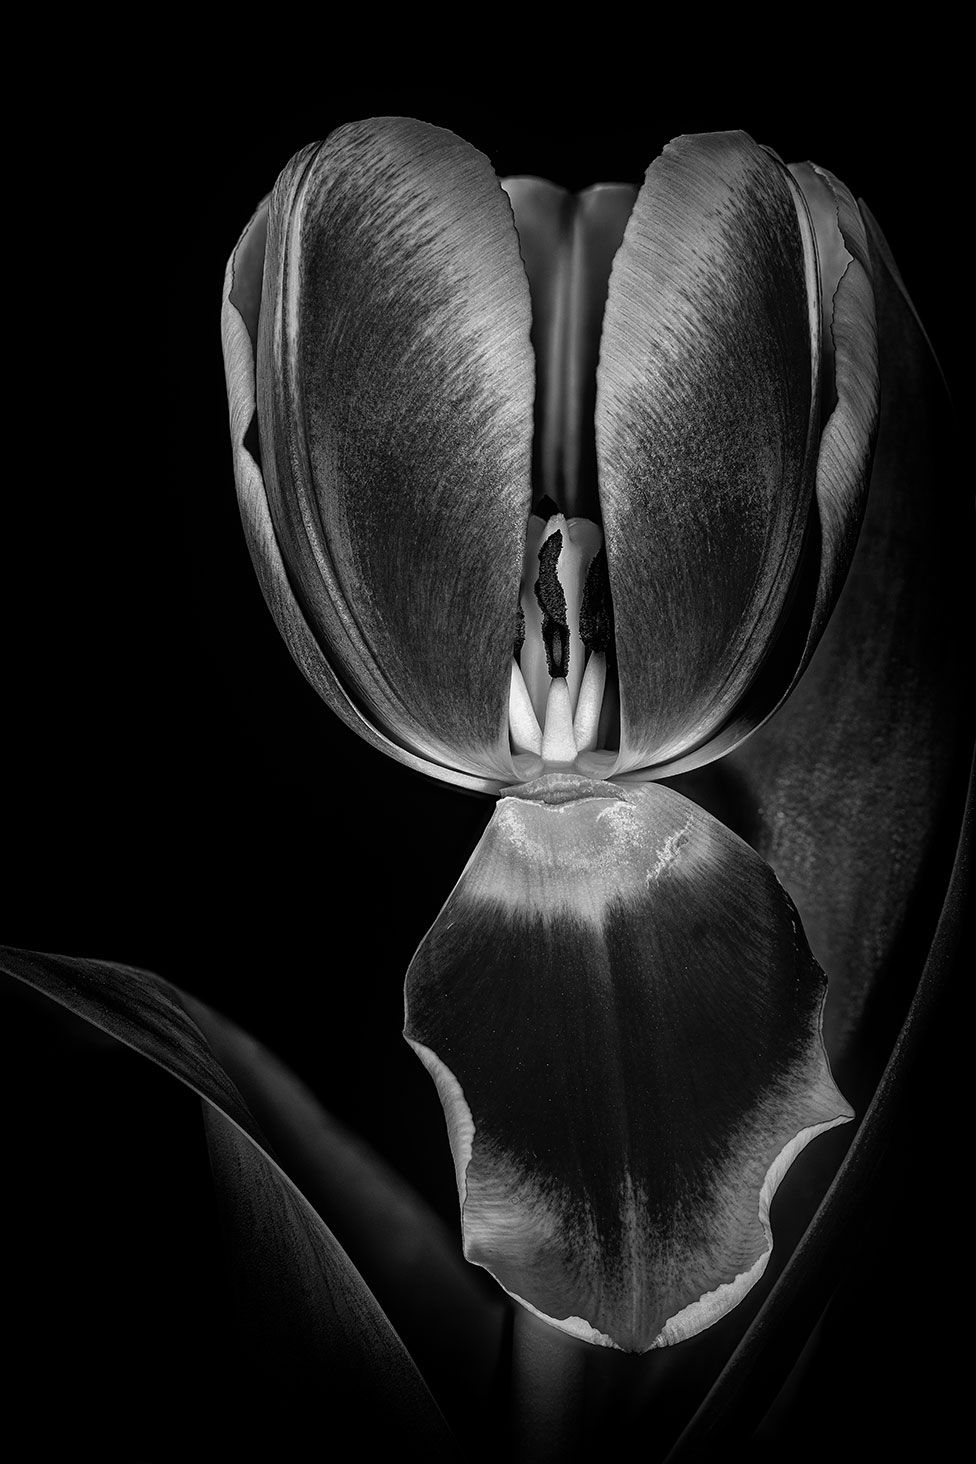 A close up image of a tulip flower